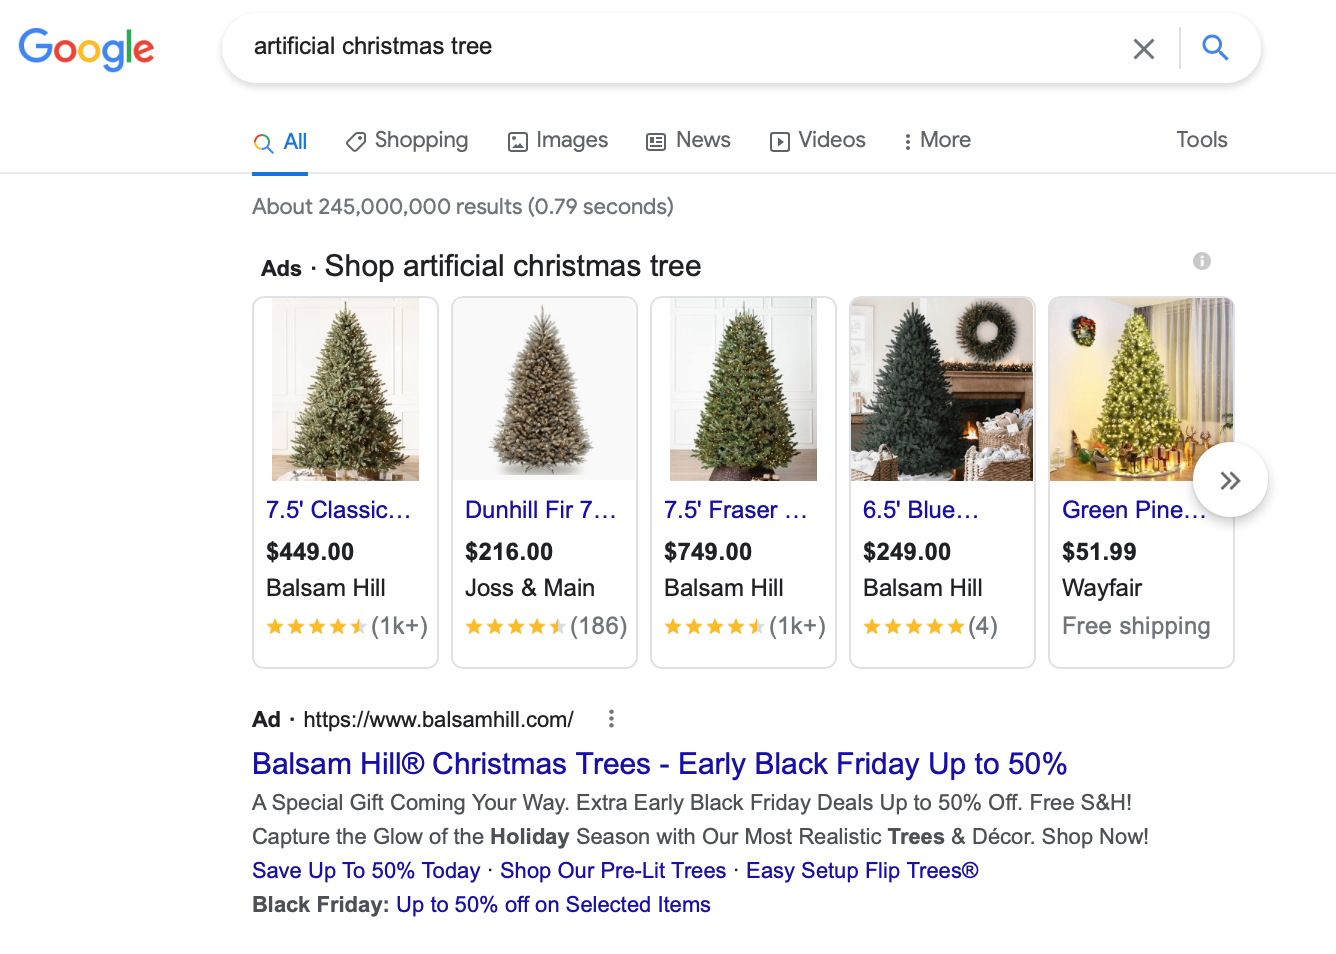 A search for "artificial Christmas tree" that shows shopping ads and a search ad for Balsam Hill